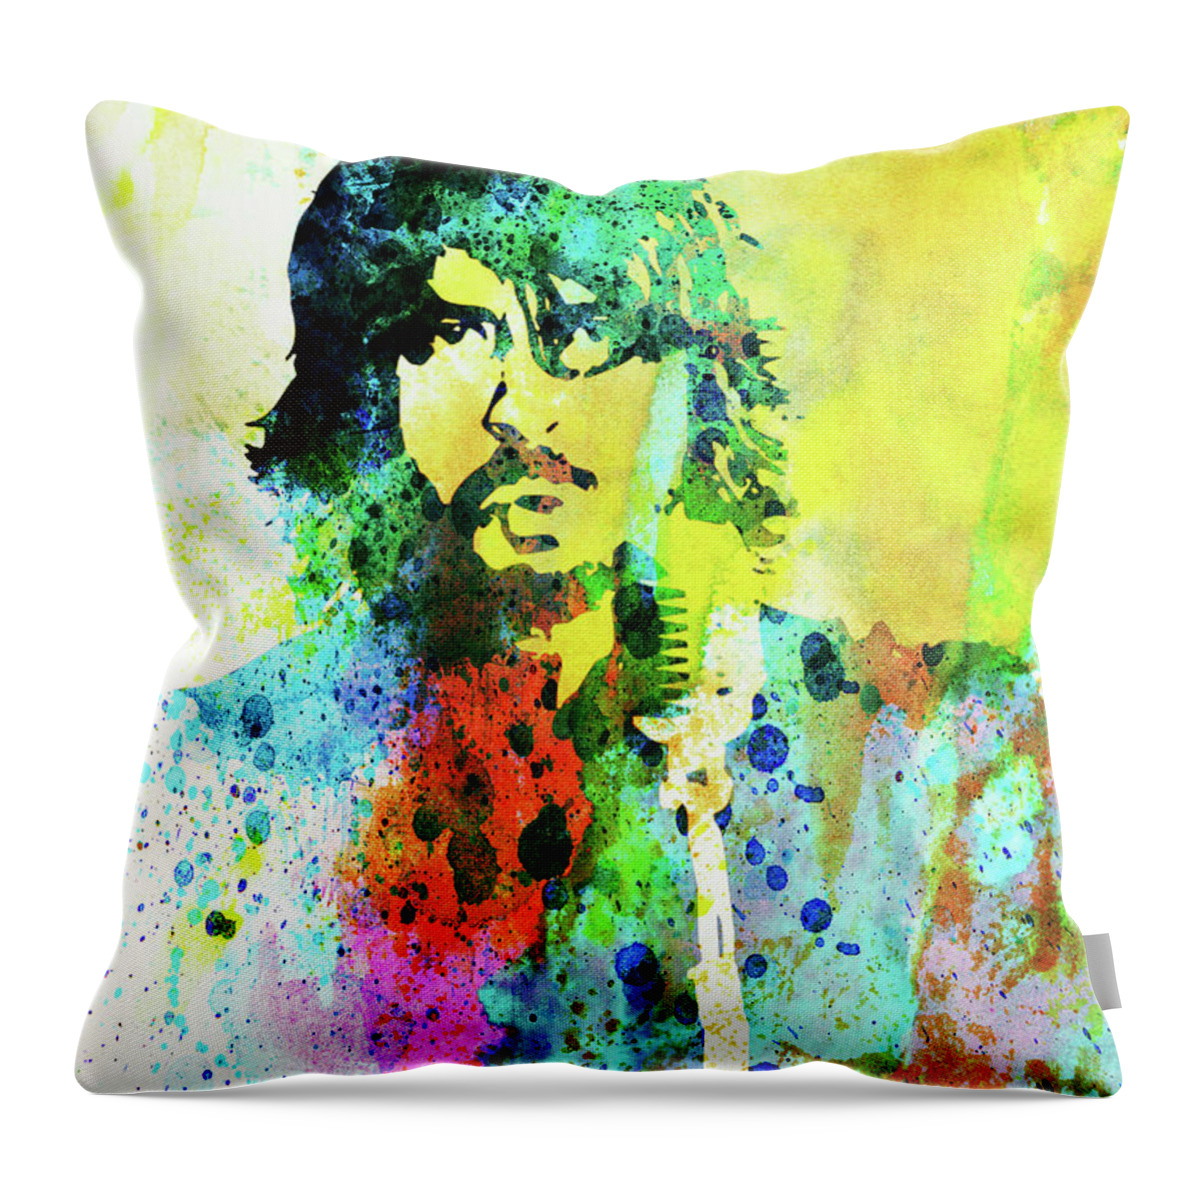 Foo Fighters Throw Pillow featuring the mixed media Legendary Foo Fighters Watercolor by Naxart Studio